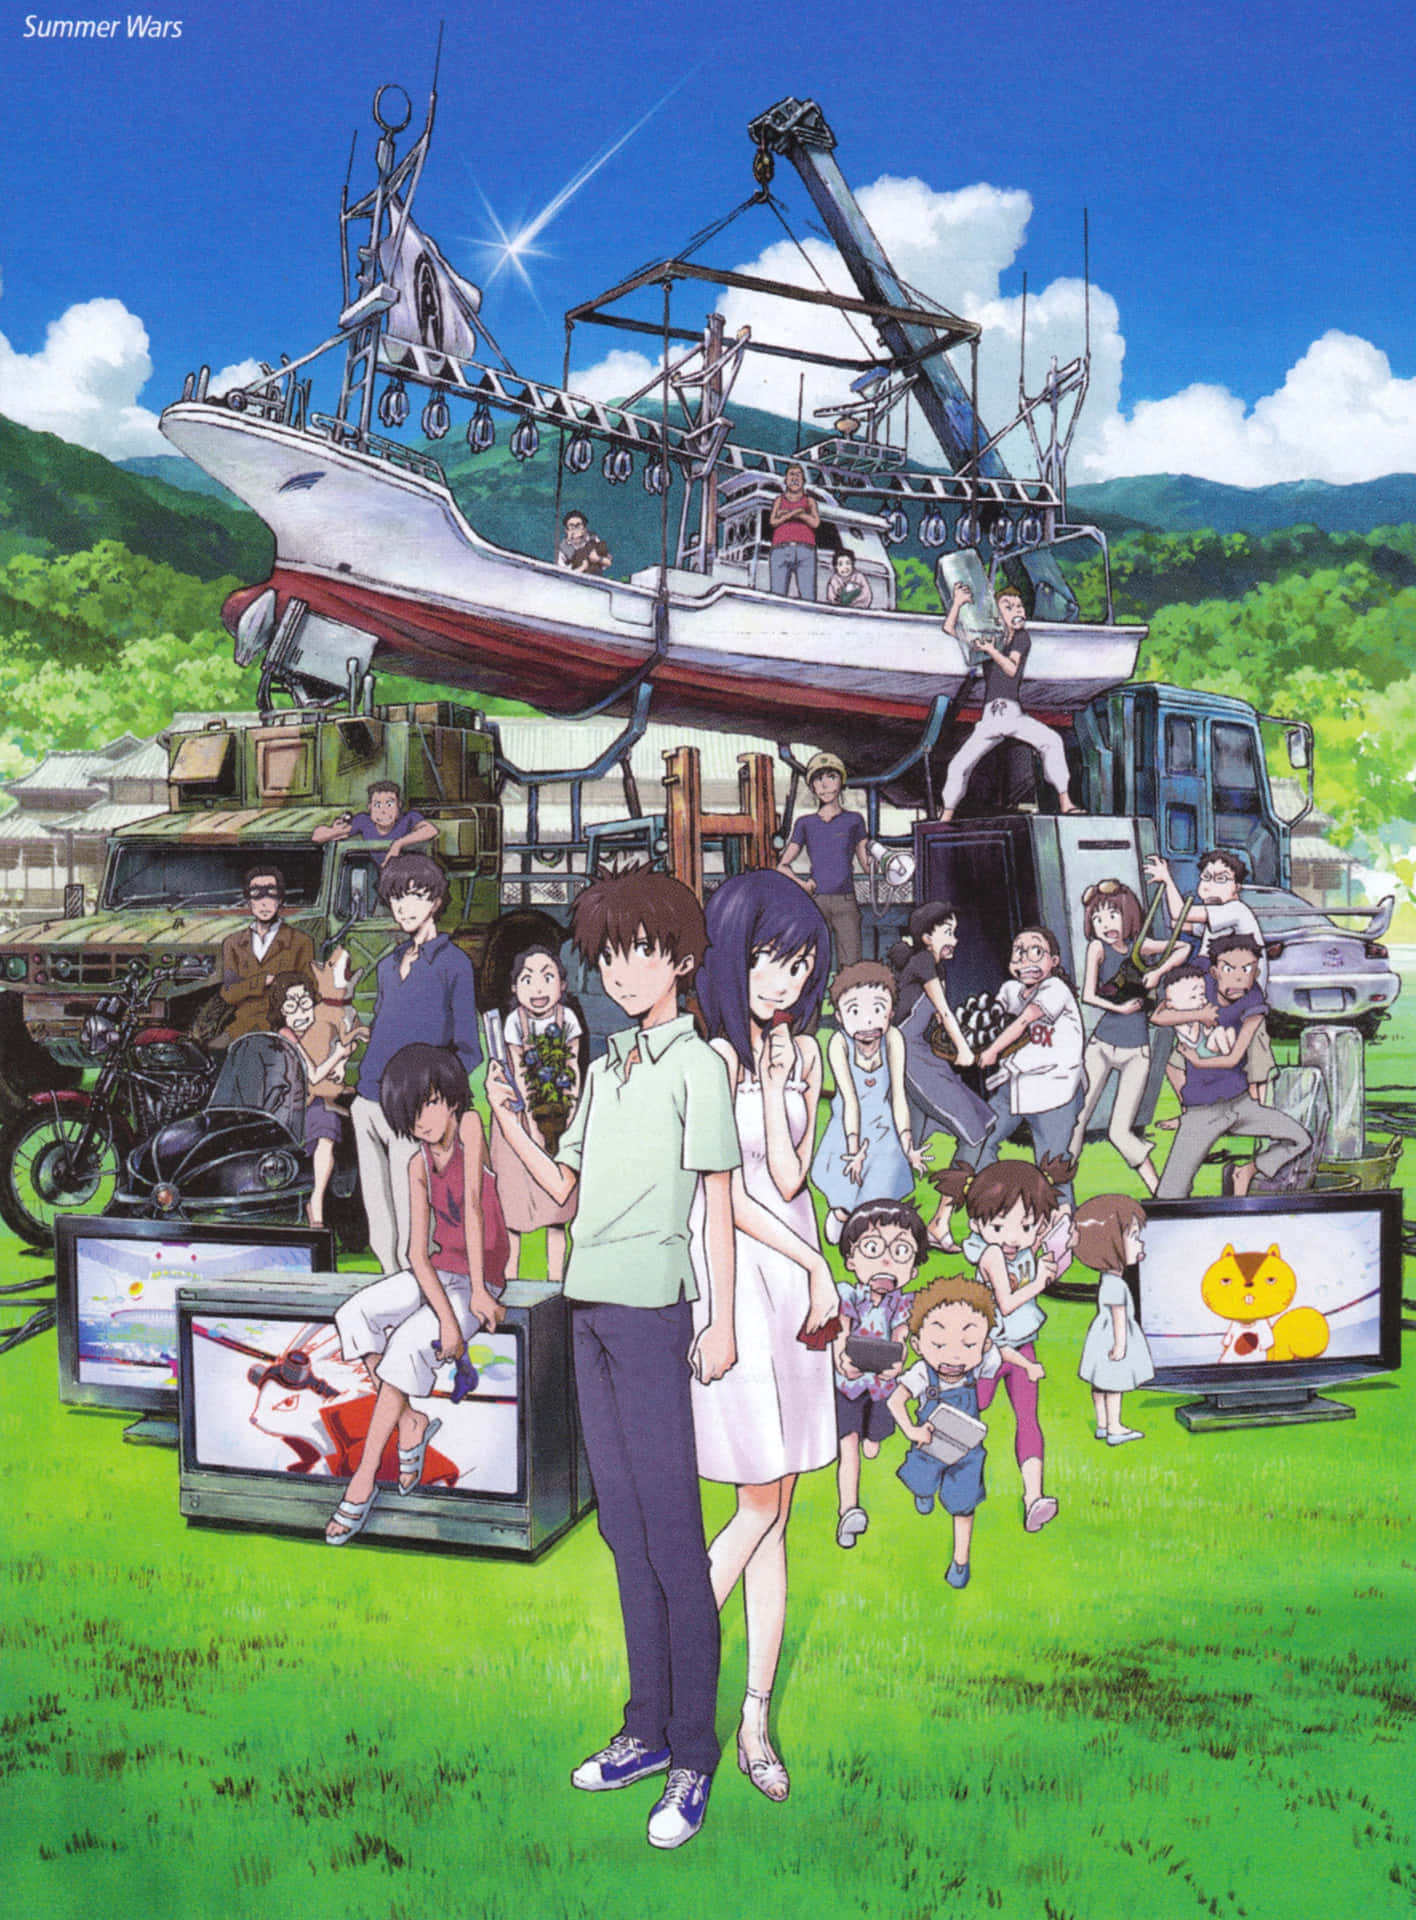 Mamoru Hosoda anime classic Summer Wars gets 4DX release with motion seats  and theater effects  SoraNews24 Japan News